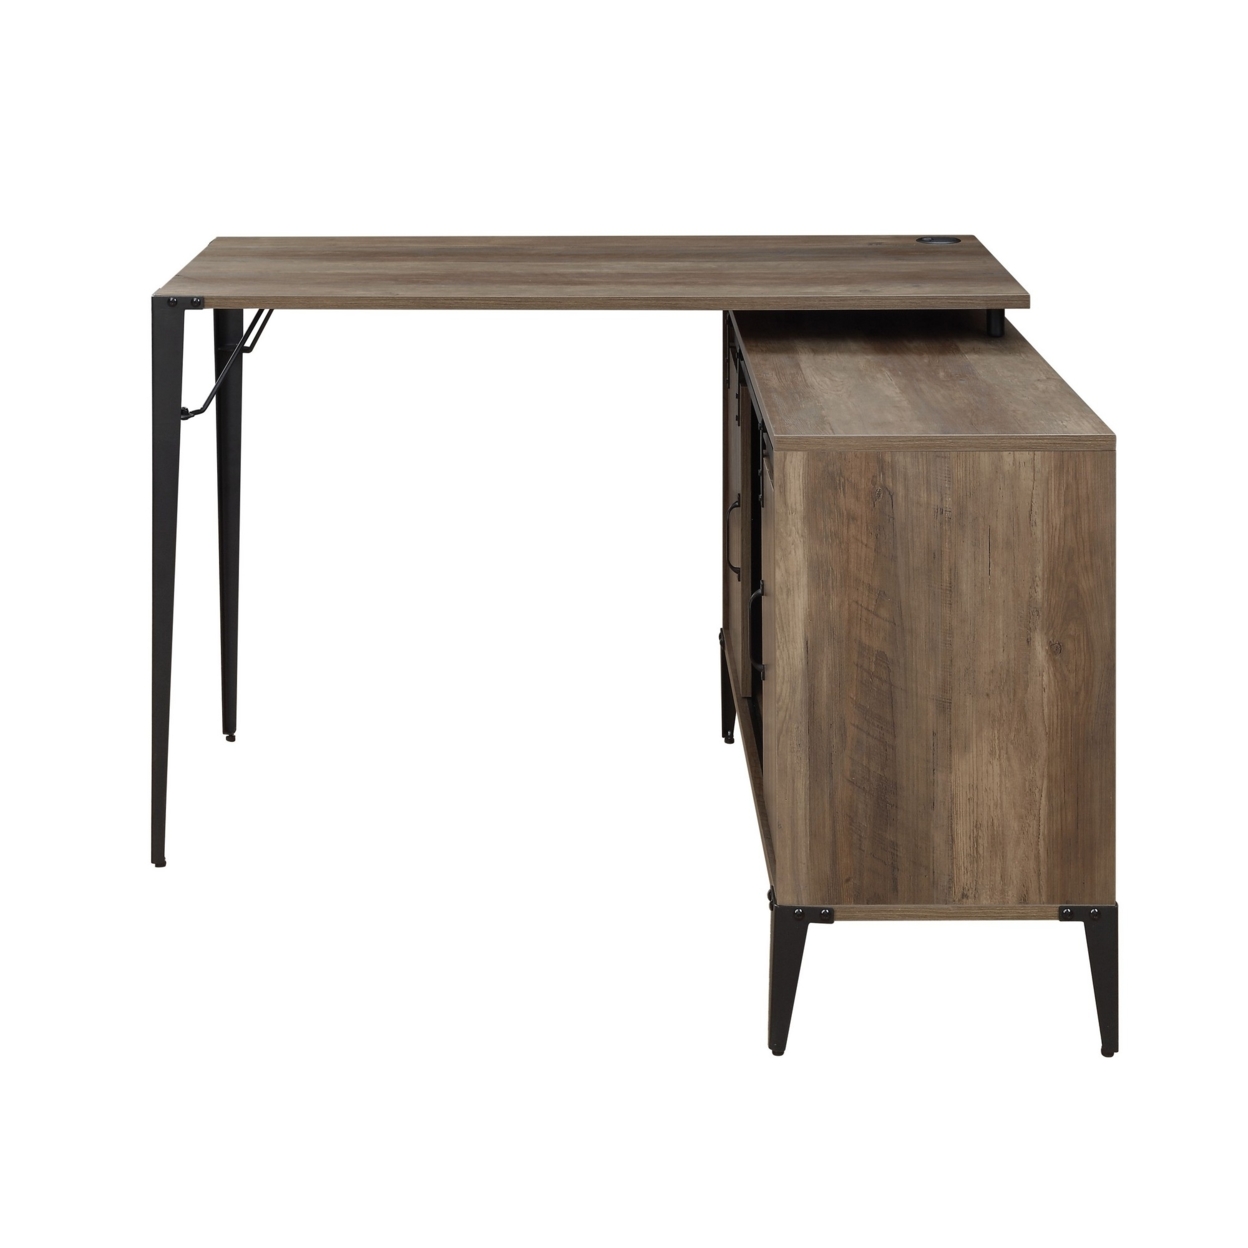 Writing Desk With L Shaped Tabletop And Sliding Barn Door, Brown And Black- Saltoro Sherpi